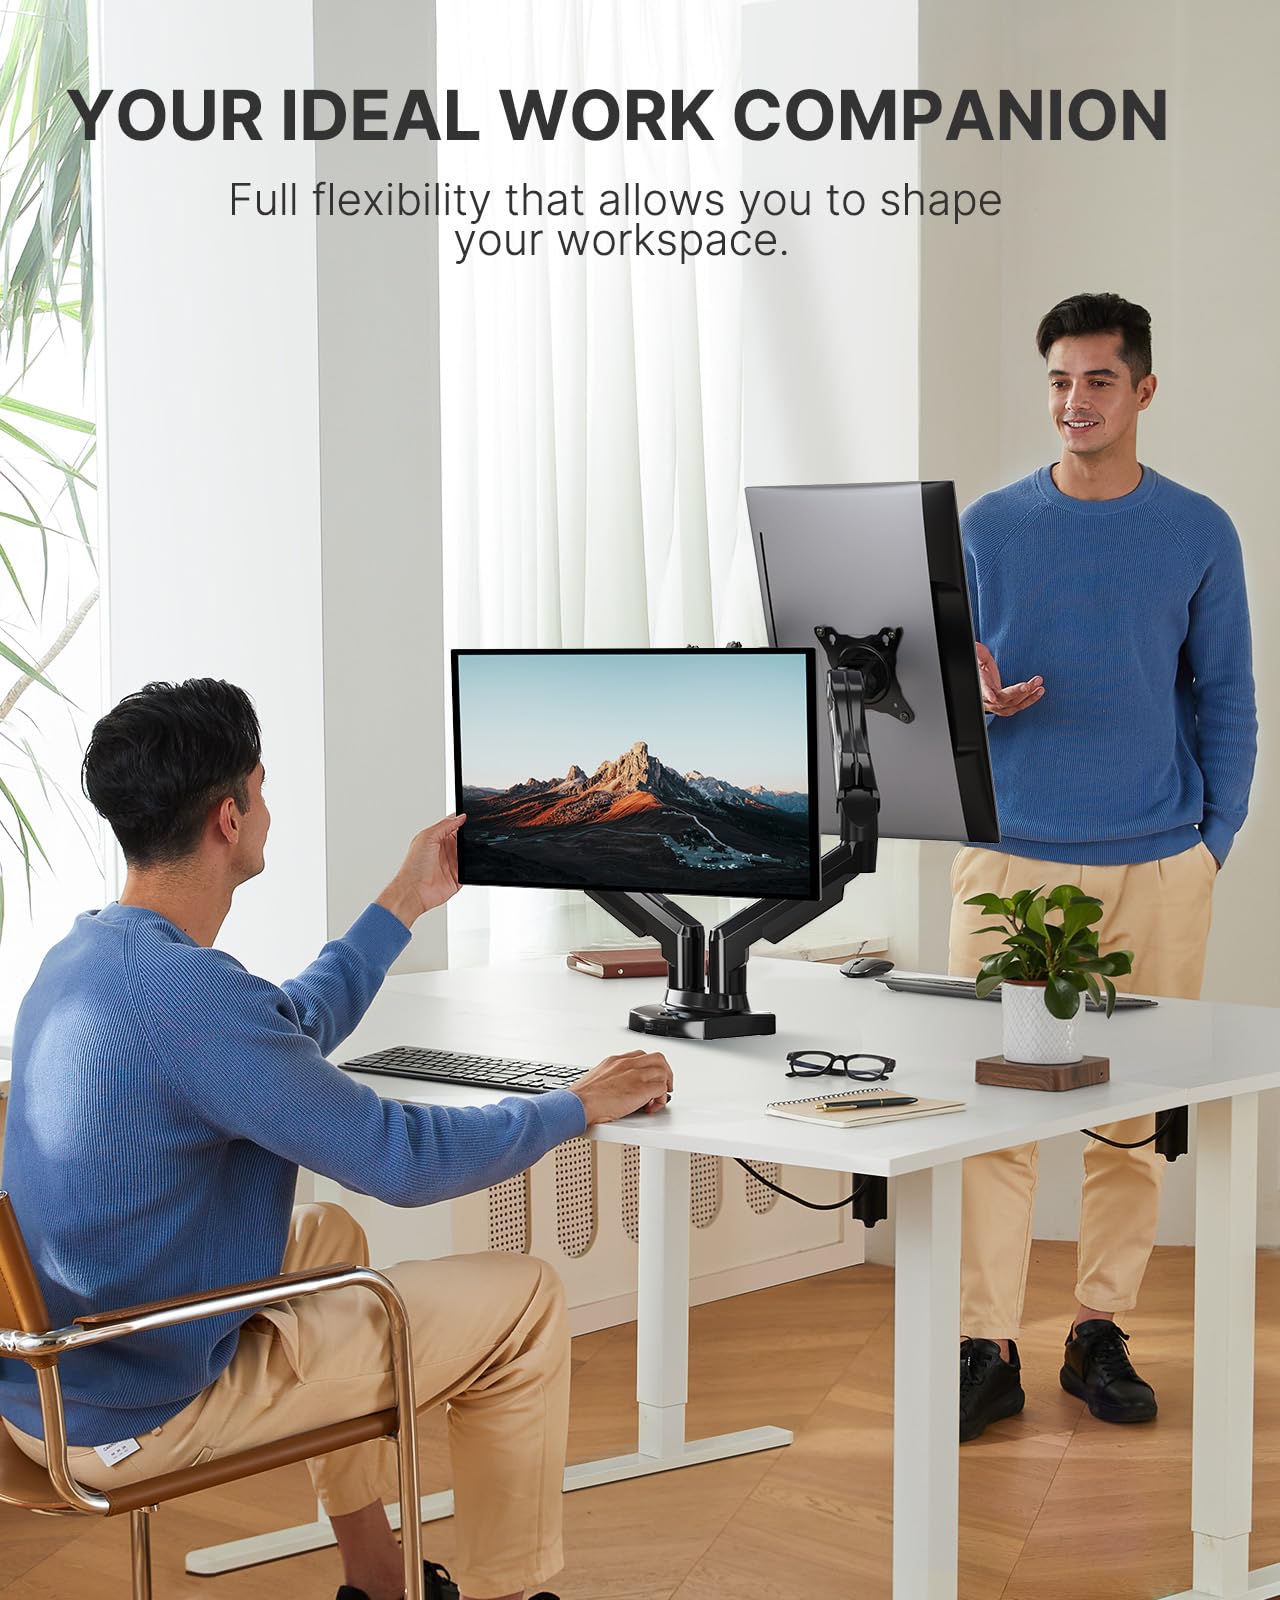 HUANUO Dual Monitor Stand - Adjustable Spring Monitor Desk Mount Swivel Vesa Bracket with C Clamp, Grommet Mounting Base for 13 to 30 Inch Computer Screens - Each Arm Holds 4.4 to 19.8lbs